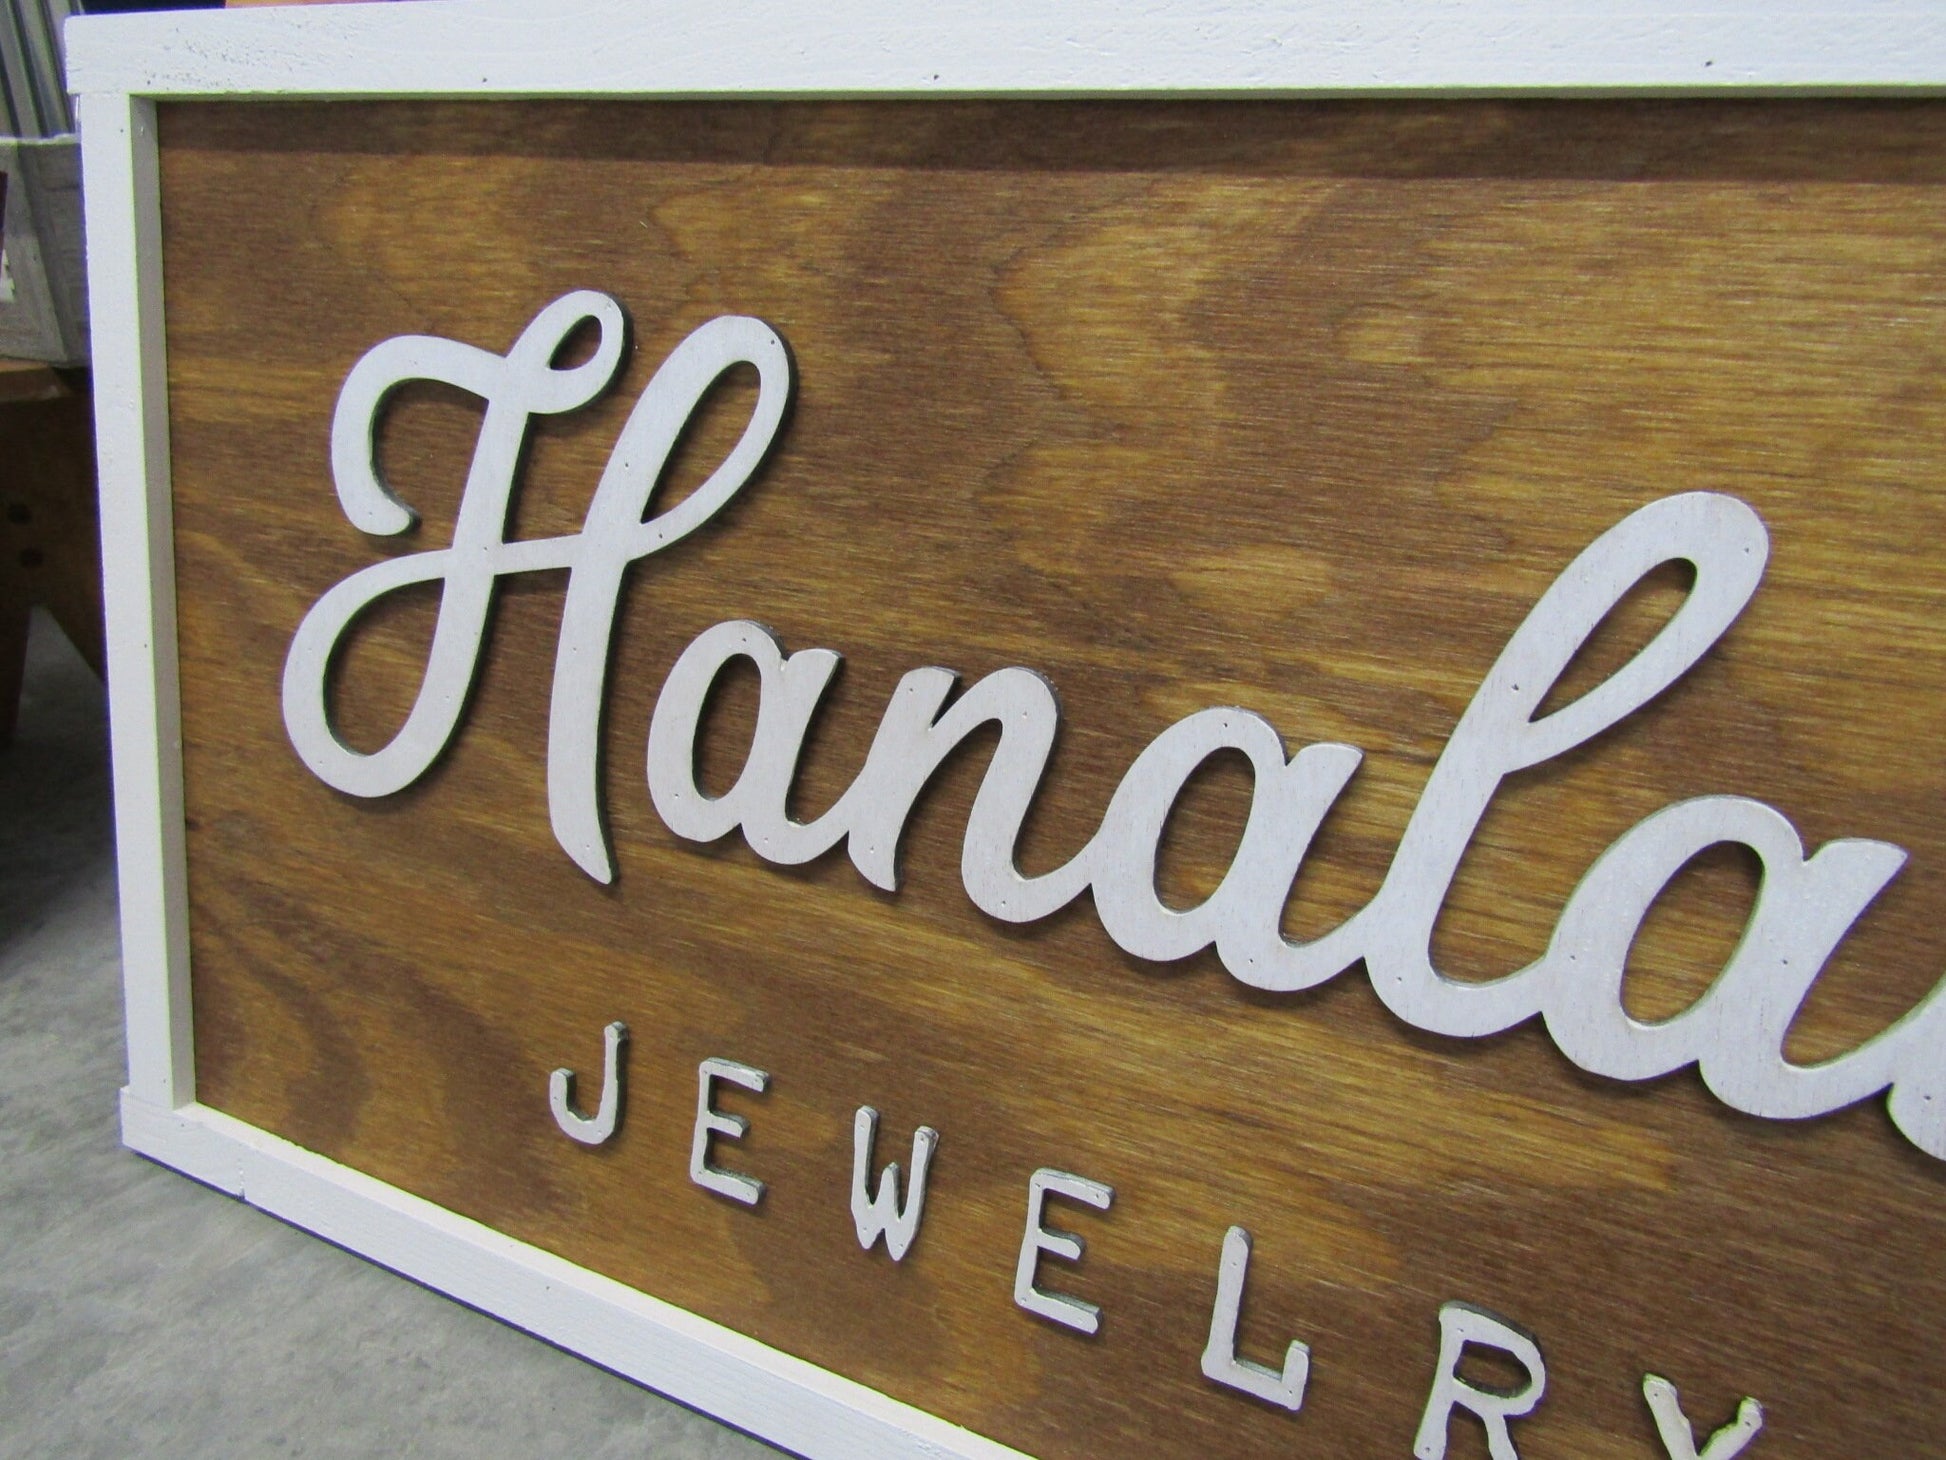 Permanent Jewelry Custom Business Signage Rectangle 3D Vendor Booth Fair Display Indoor Outdoor Small Business Logo Laser Cut Wood